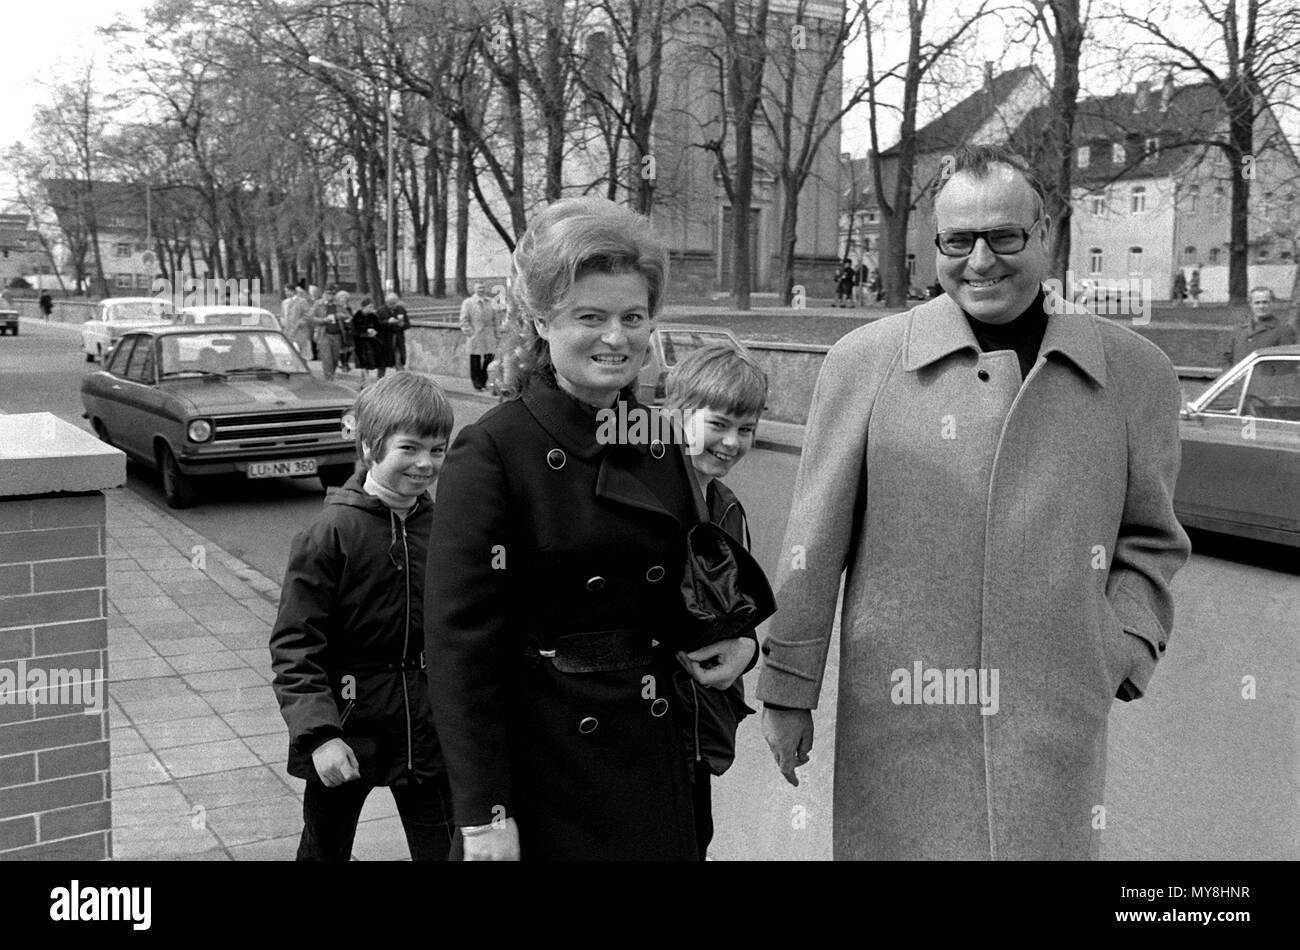 Premier of Rhineland-Palatinate and CDU party leader Helmut Kohl on his way to vote in the local elections together with his wife Hannelore and sons Walter and Peter after attending church, in Ludwigshafen-Oggersheim, Germany, on 17 March 1974. | usage worldwide Stock Photo